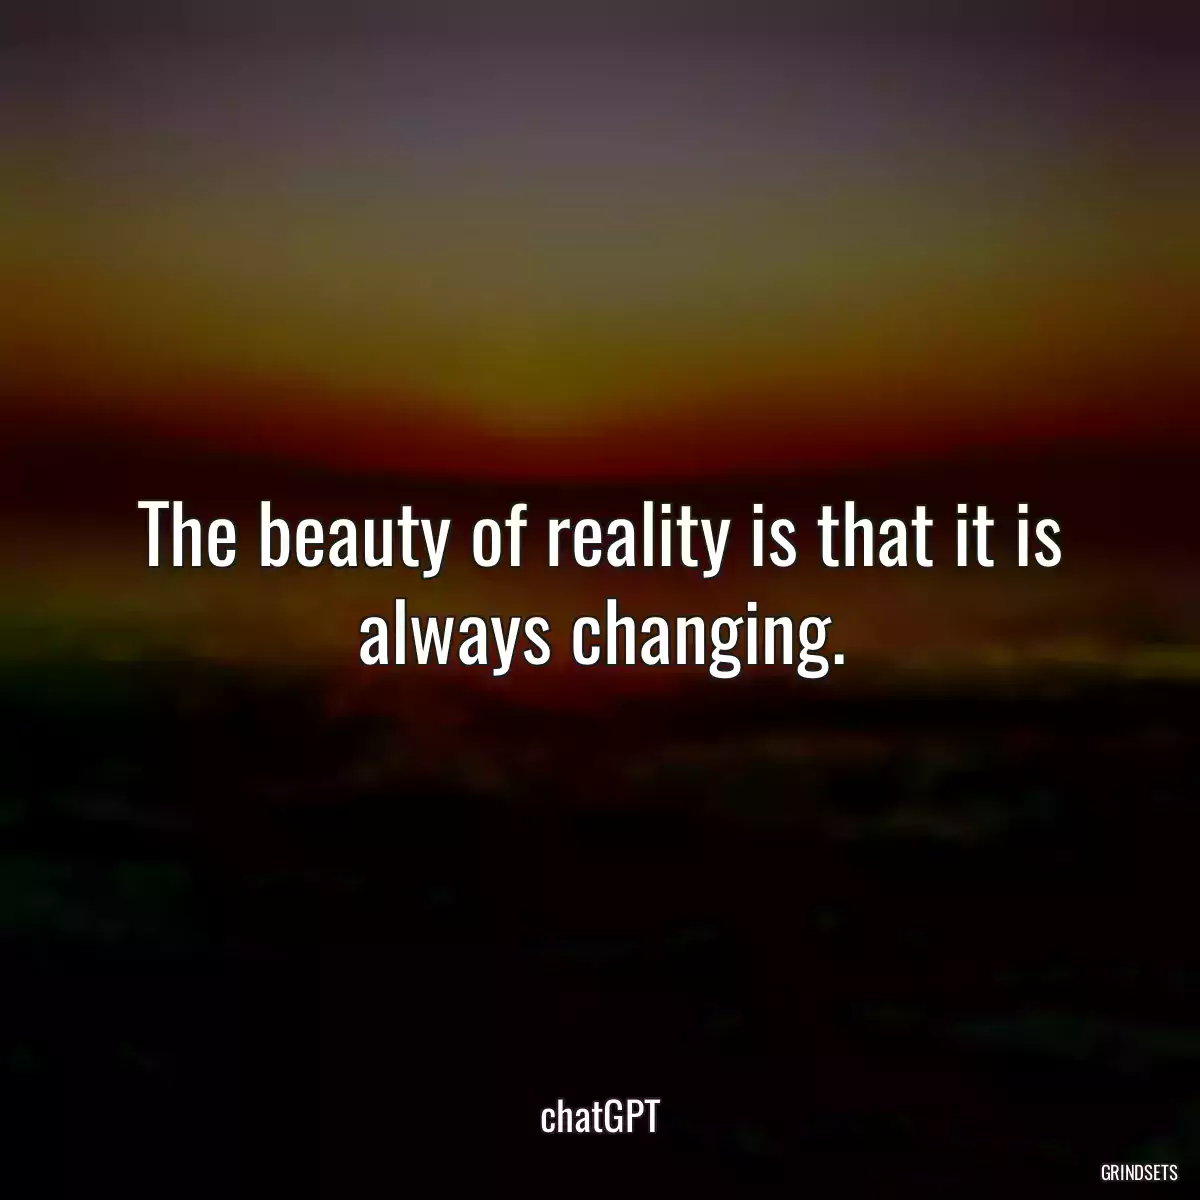 The beauty of reality is that it is always changing.